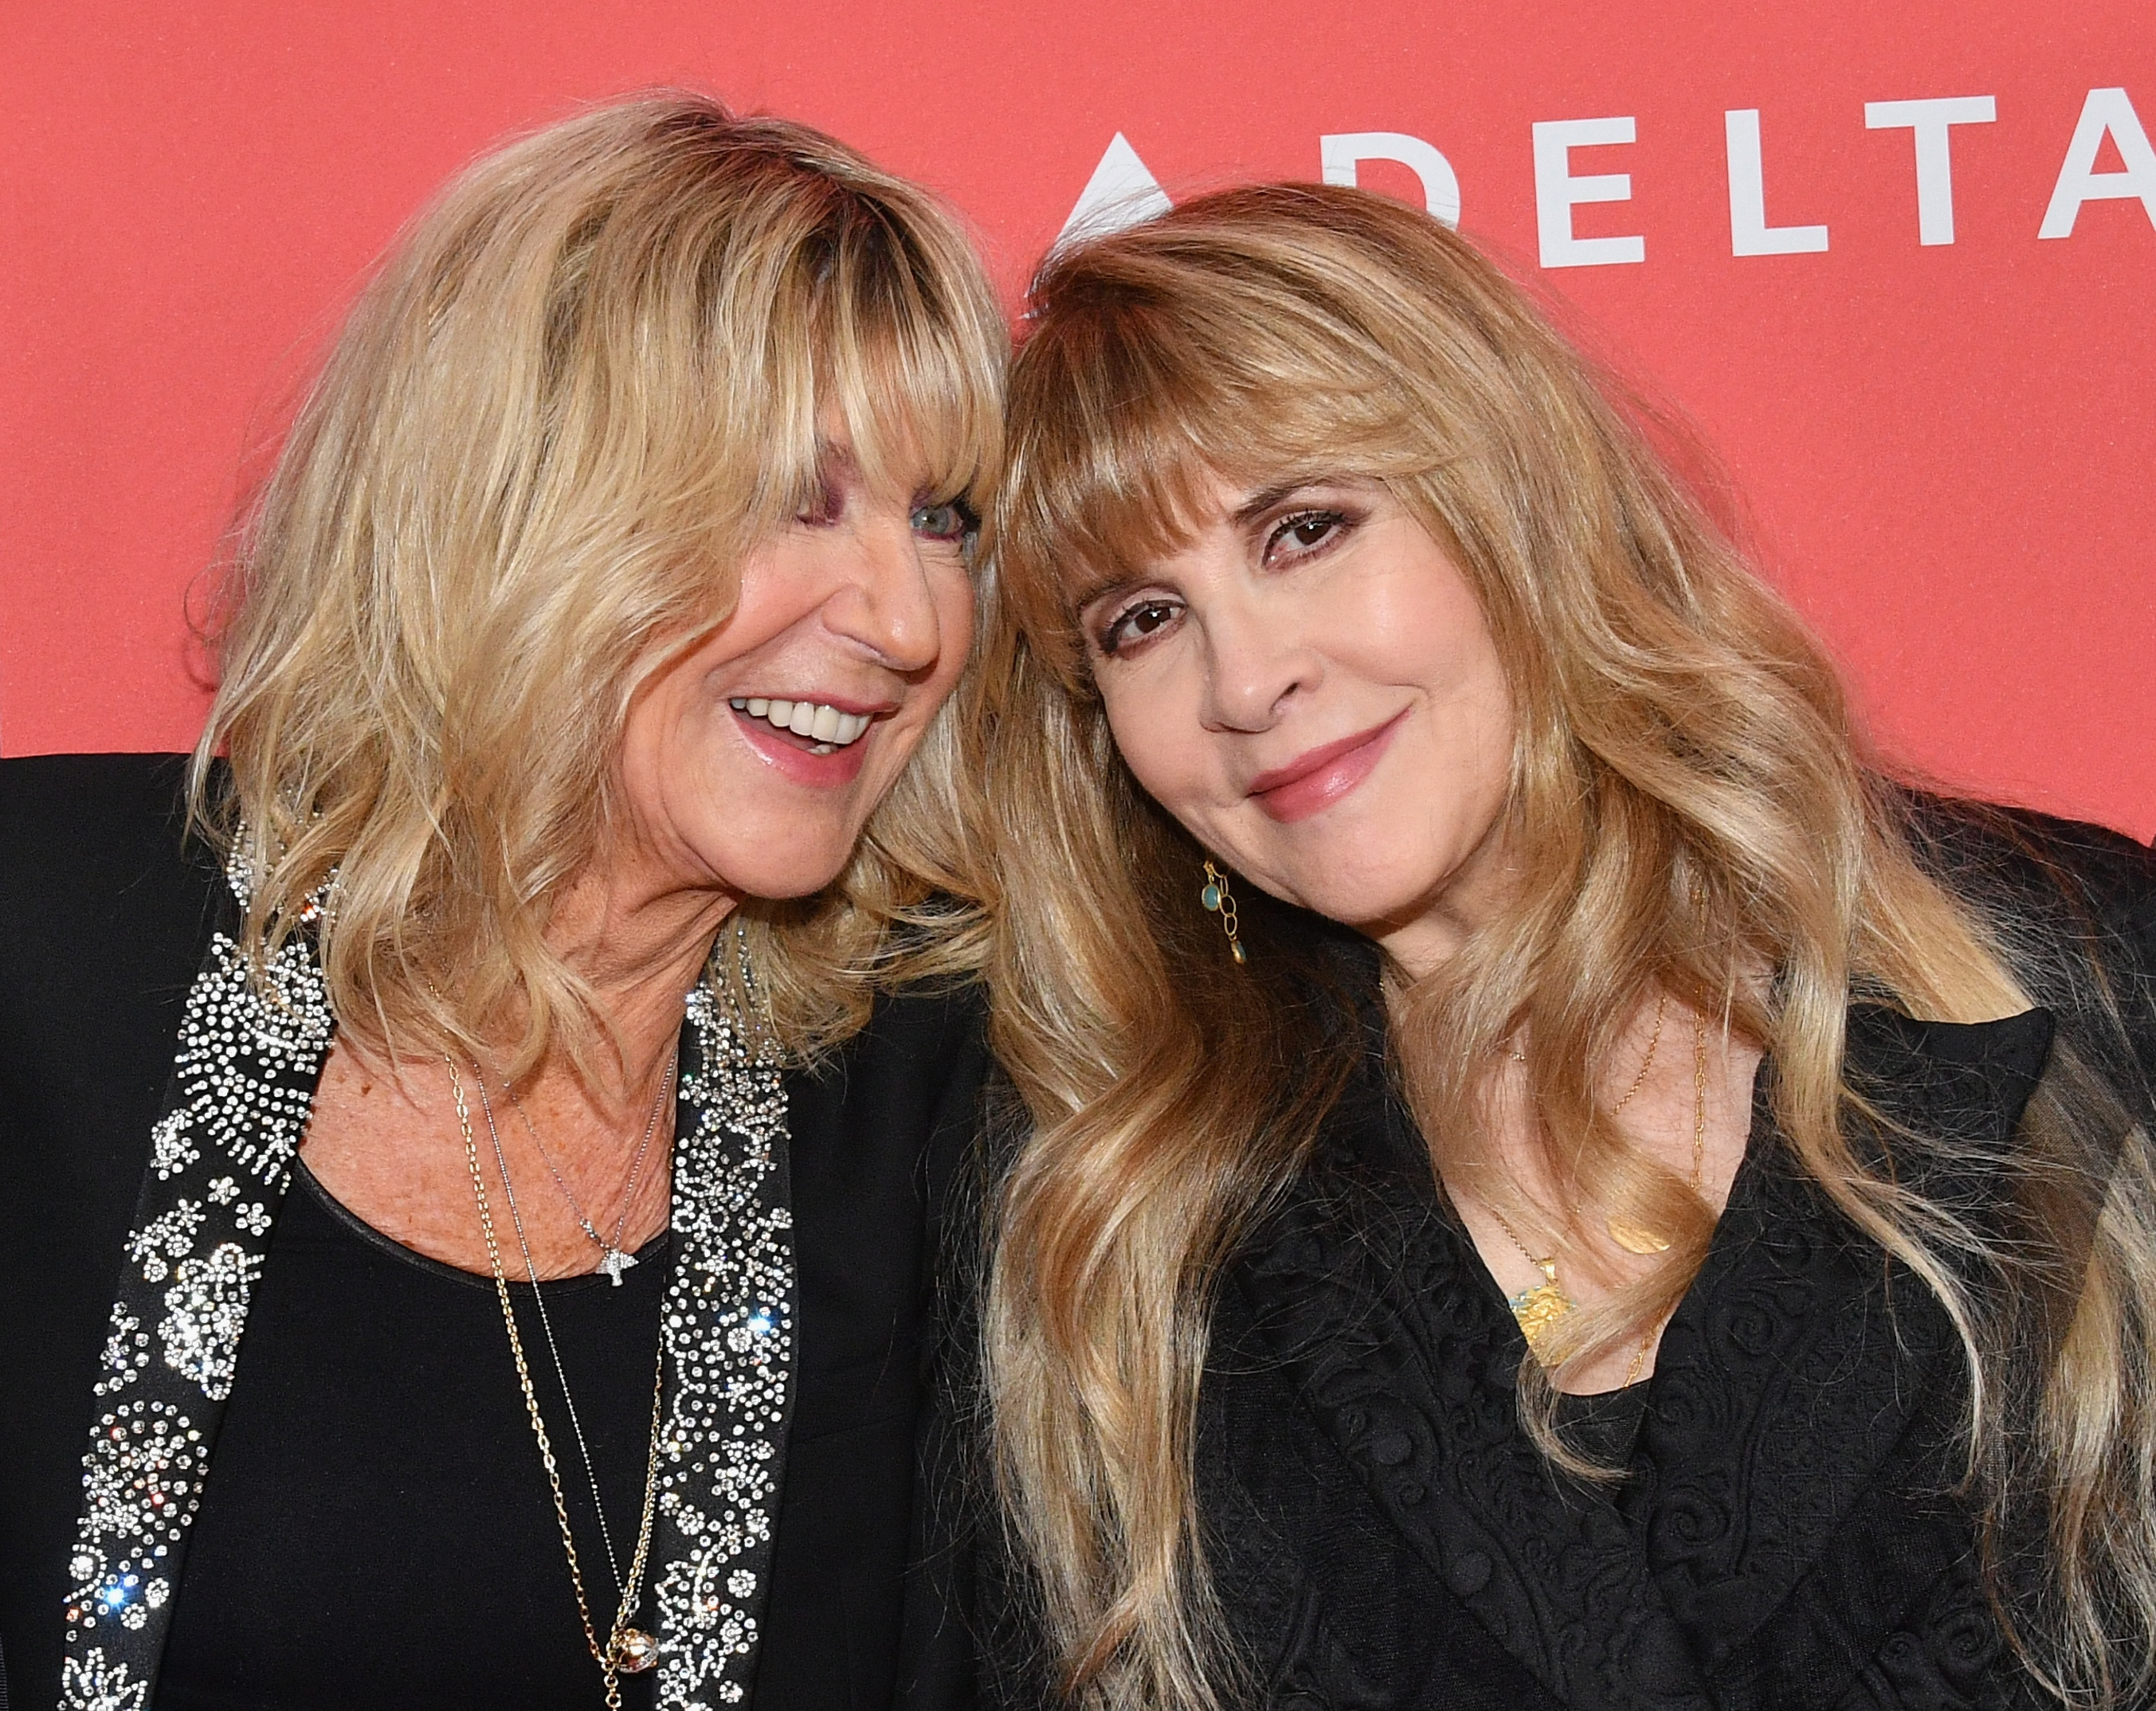 Stevie Nicks and Christine McVie both wear black and stand together against a red background.